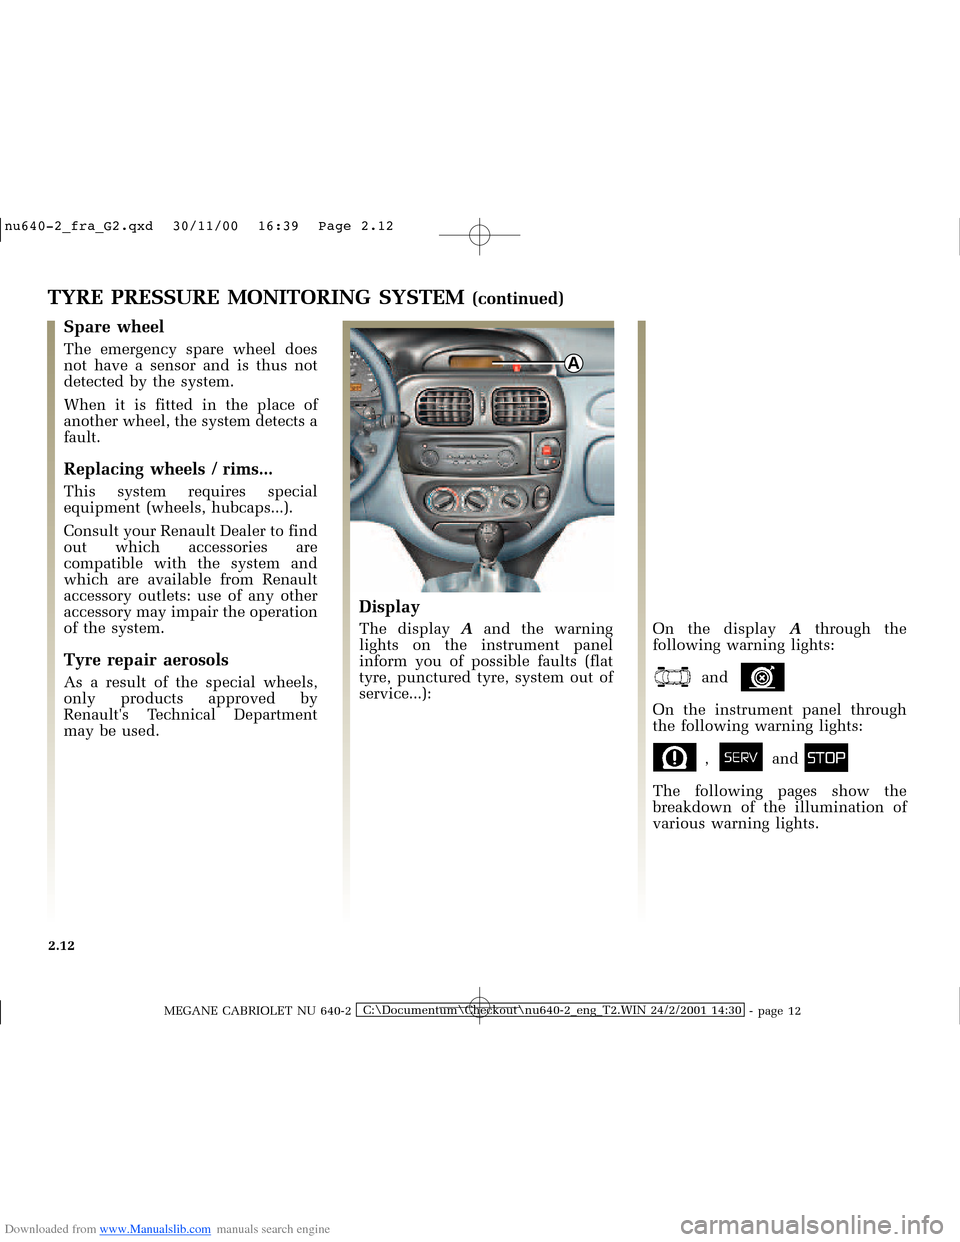 RENAULT MEGANE 2000 X64 / 1.G Owners Manual Downloaded from www.Manualslib.com manuals search engine A
�Q�X������B�I�U�D�B�*���T�[�G� � ��������� � ������ � �3�D�J�H� ����
MEGANE CABRIOLET NU 640-2C:\Documentum\Ch